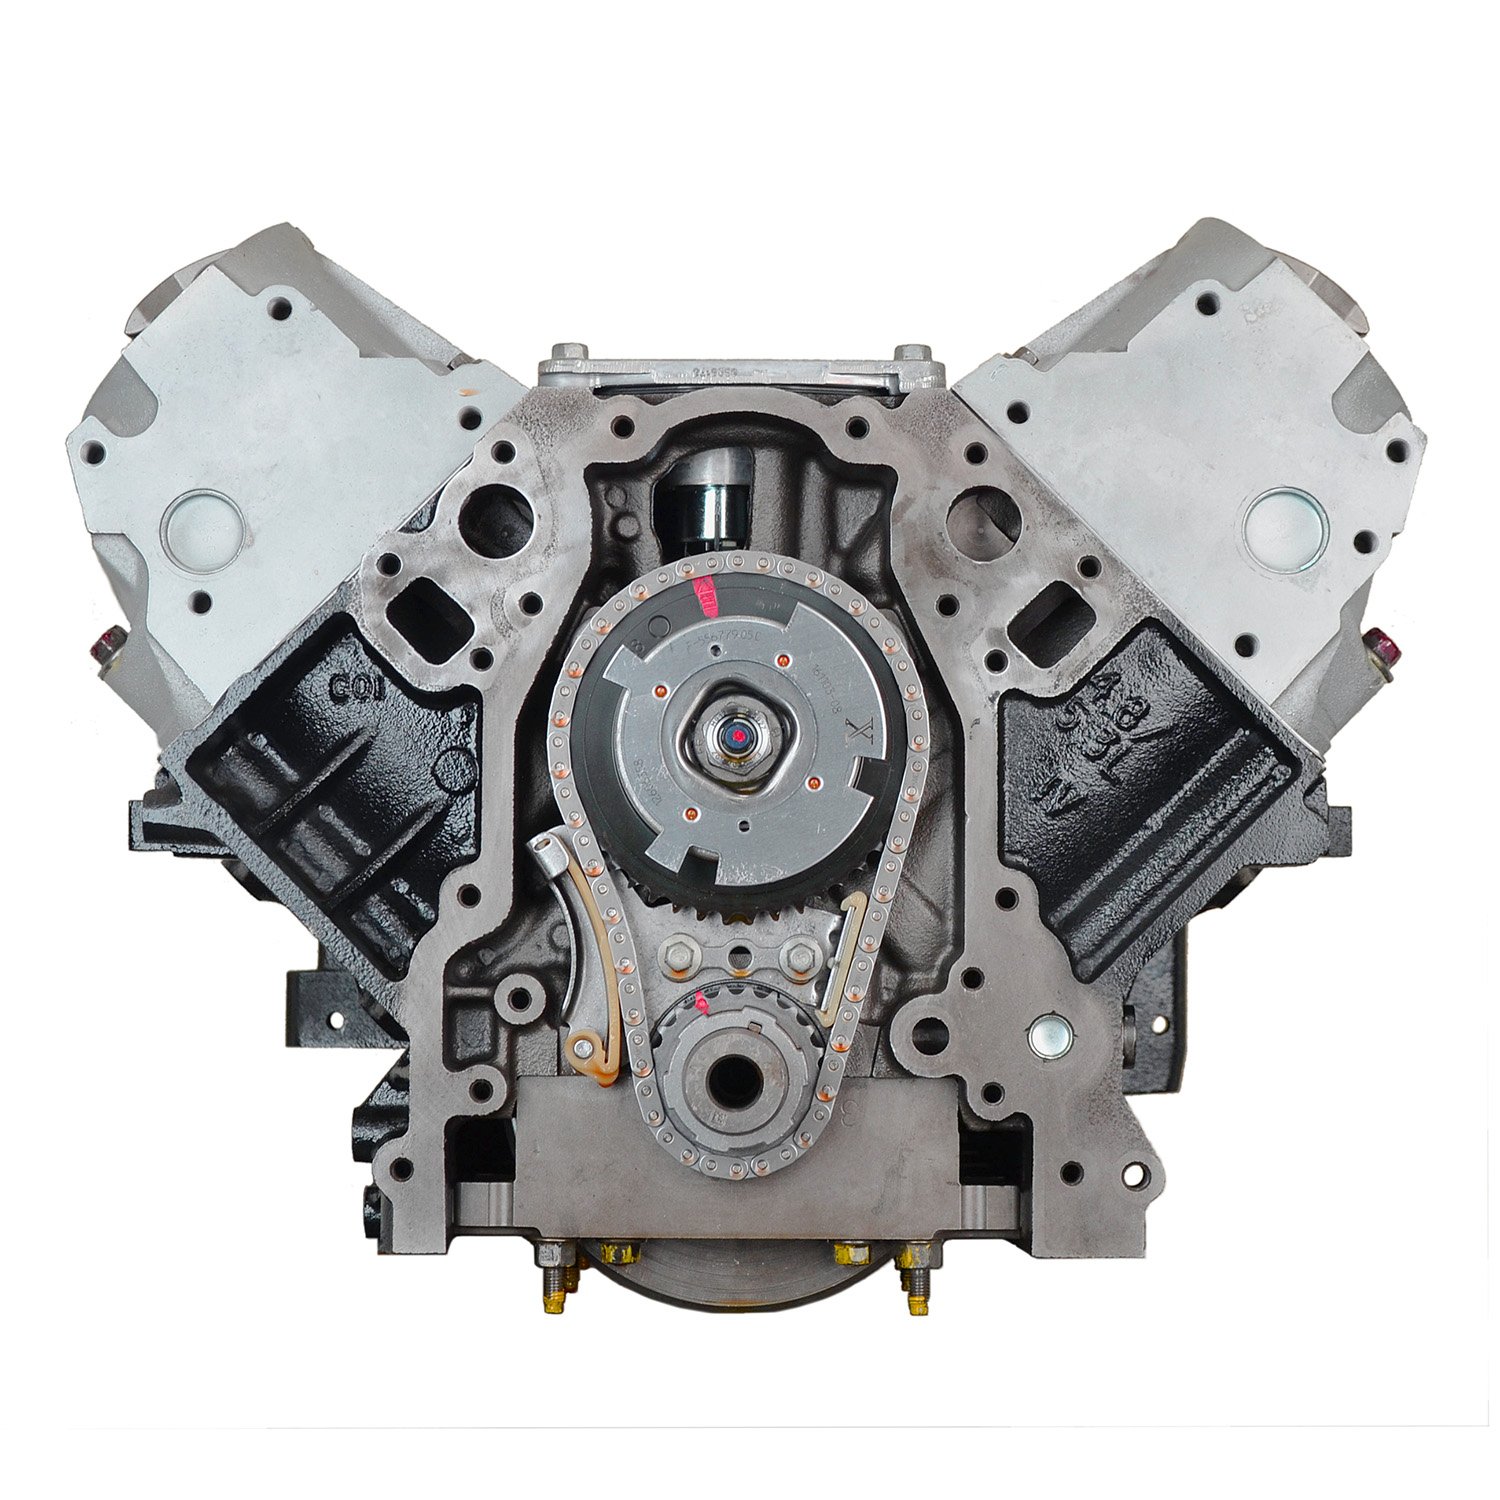 DCT20 Remanufactured Crate Engine for 2010-2014 Chevy/GMC Truck & SUV with 5.3L V8